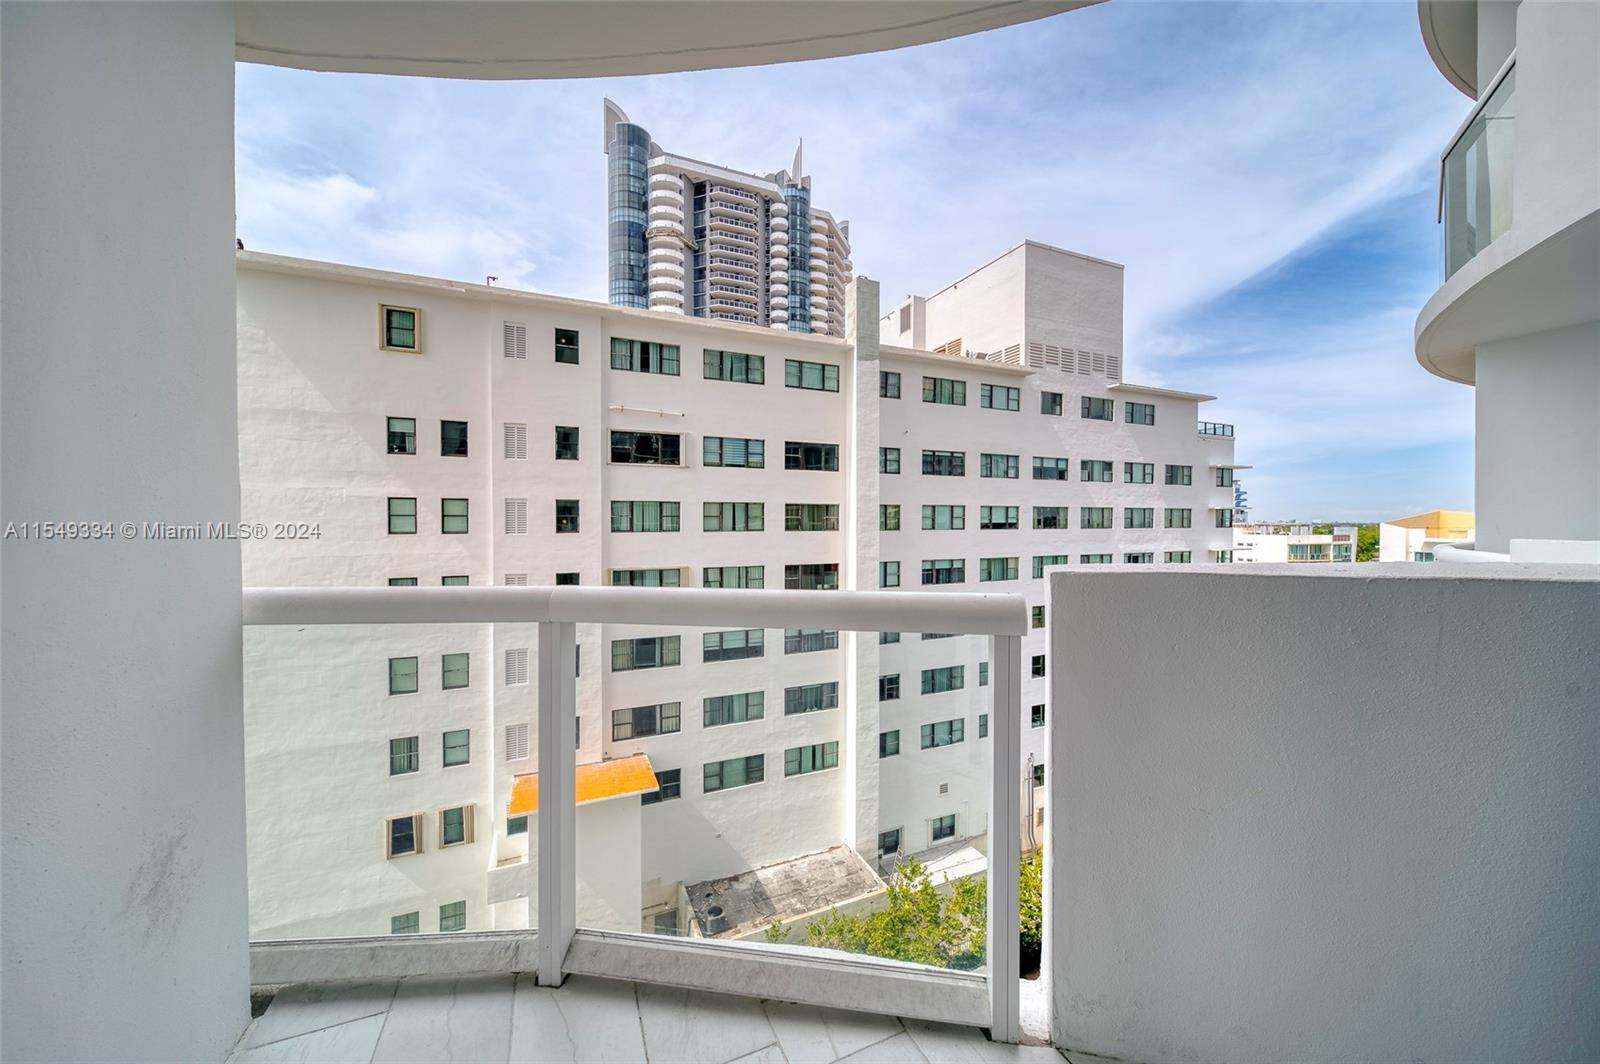 Bright and spacious condominium unit with a gorgeous view of the ocean.